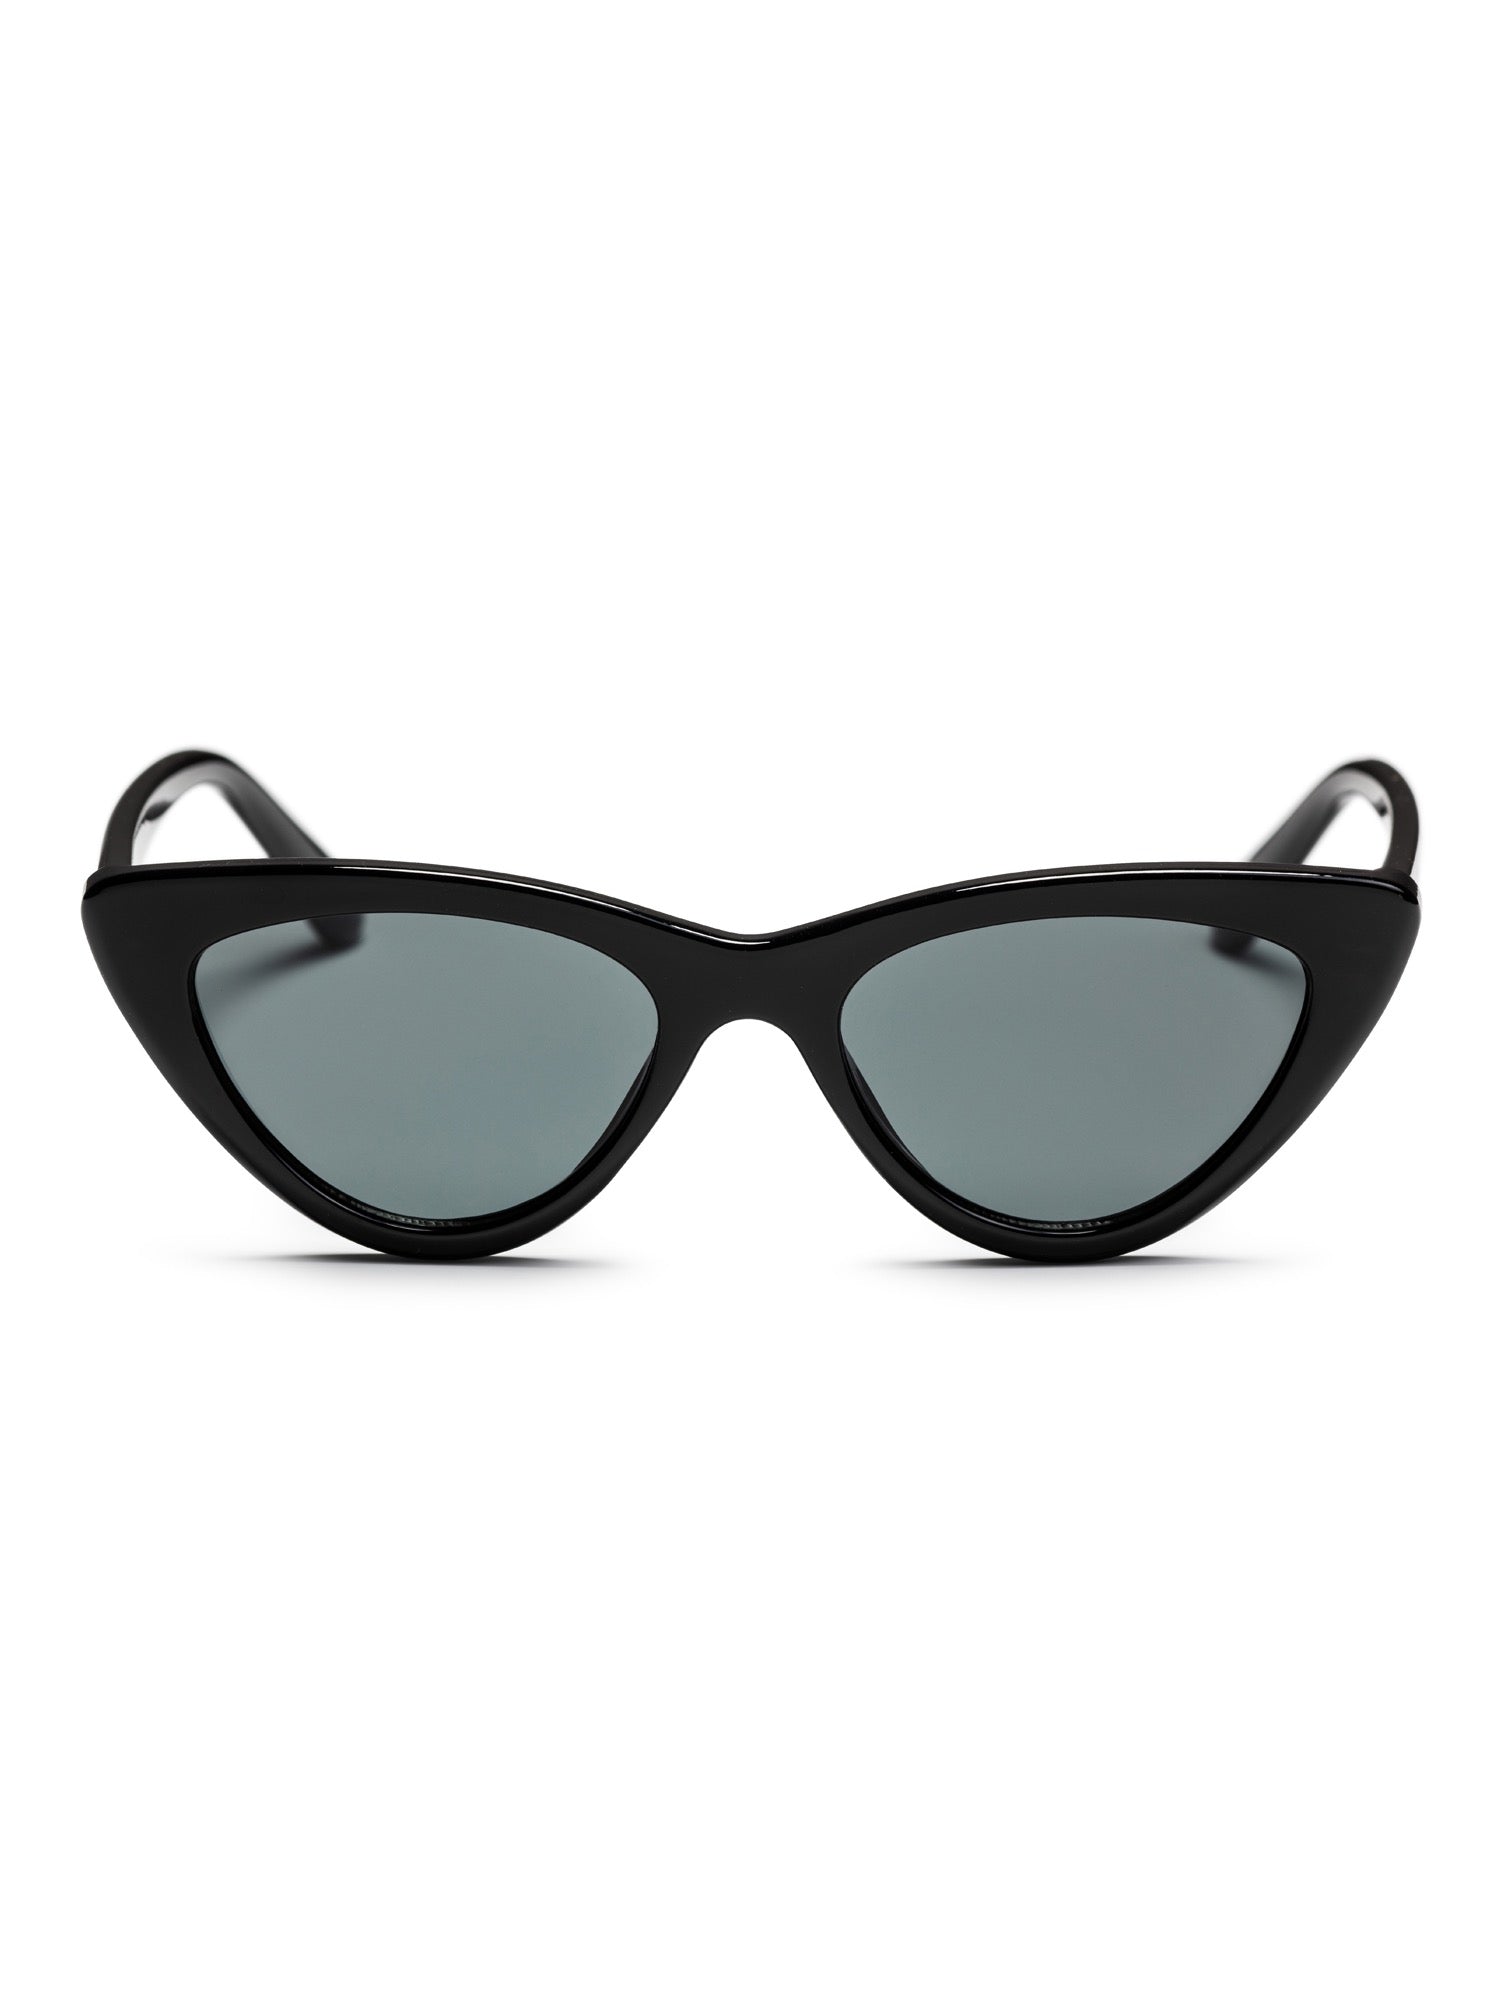 CHPO - Amy Sunglasses - Recycled Plastic - Weekendbee - sustainable sportswear